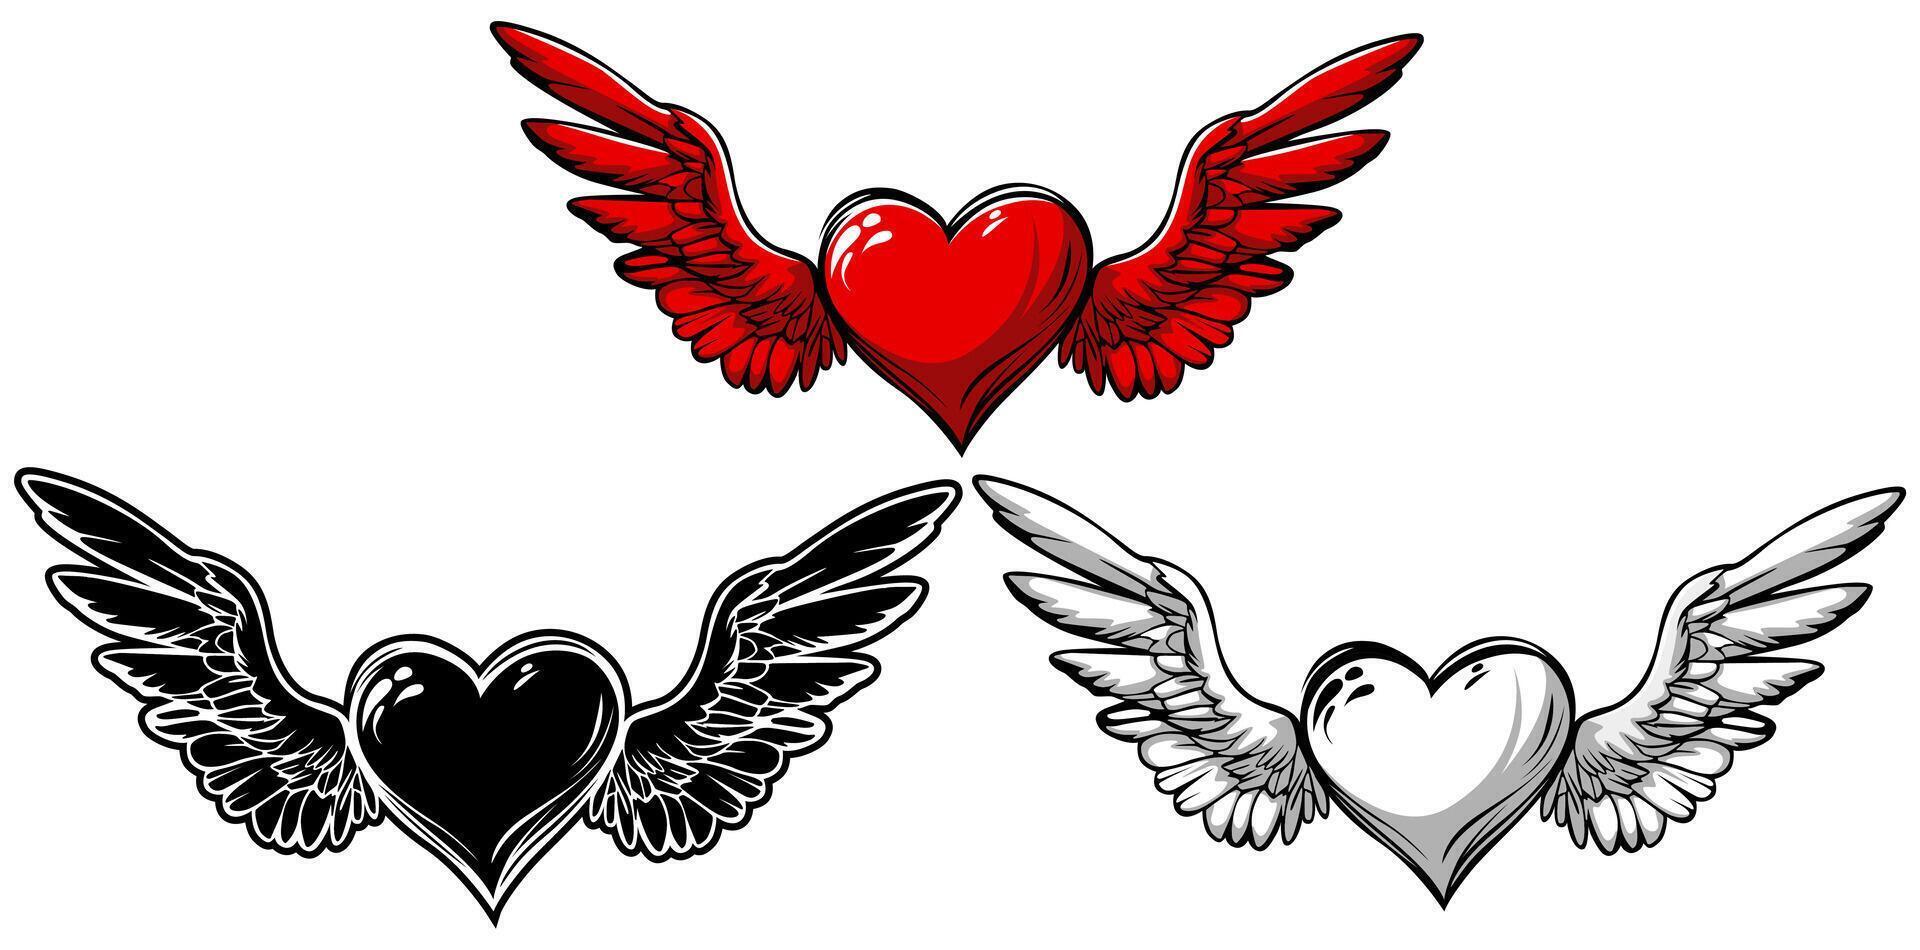 set red hearts wing fly icon. romantic love design vector